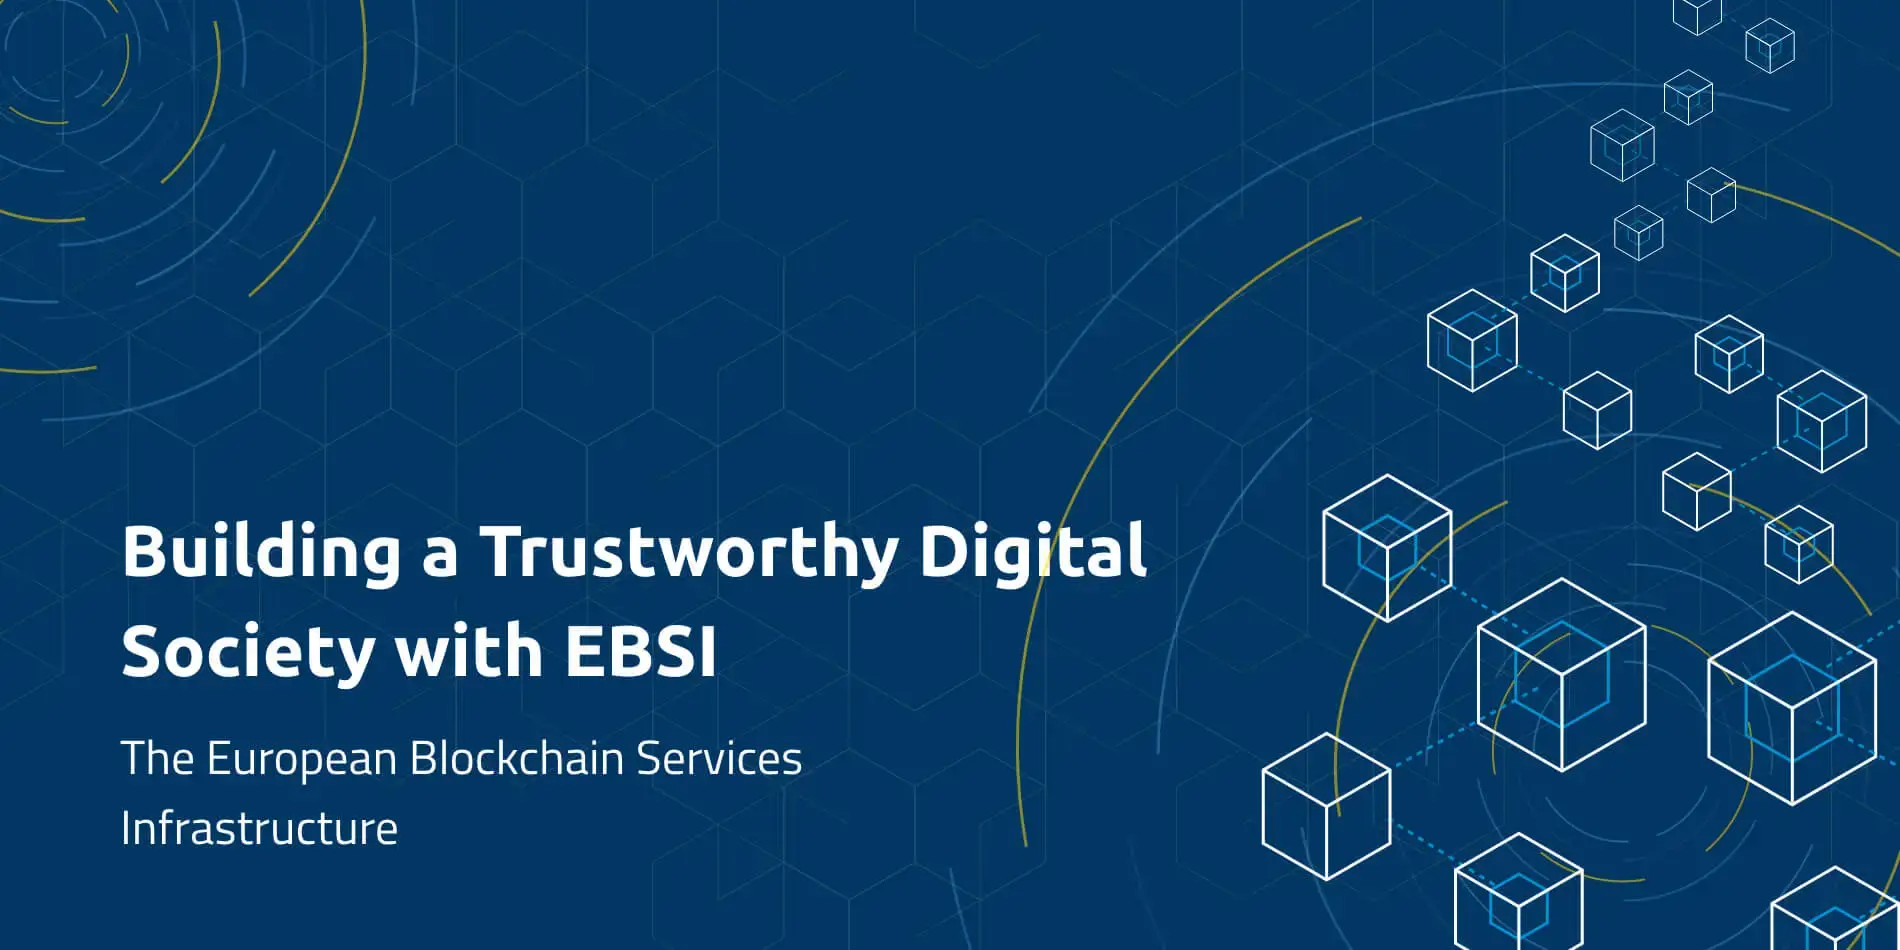  A blue promotional still with squares denoting blockchain nodes on the right and the following text on the left: "Building a Trustworthy Digital Society with EBSI: The European Blockchain Services Infrastructure"